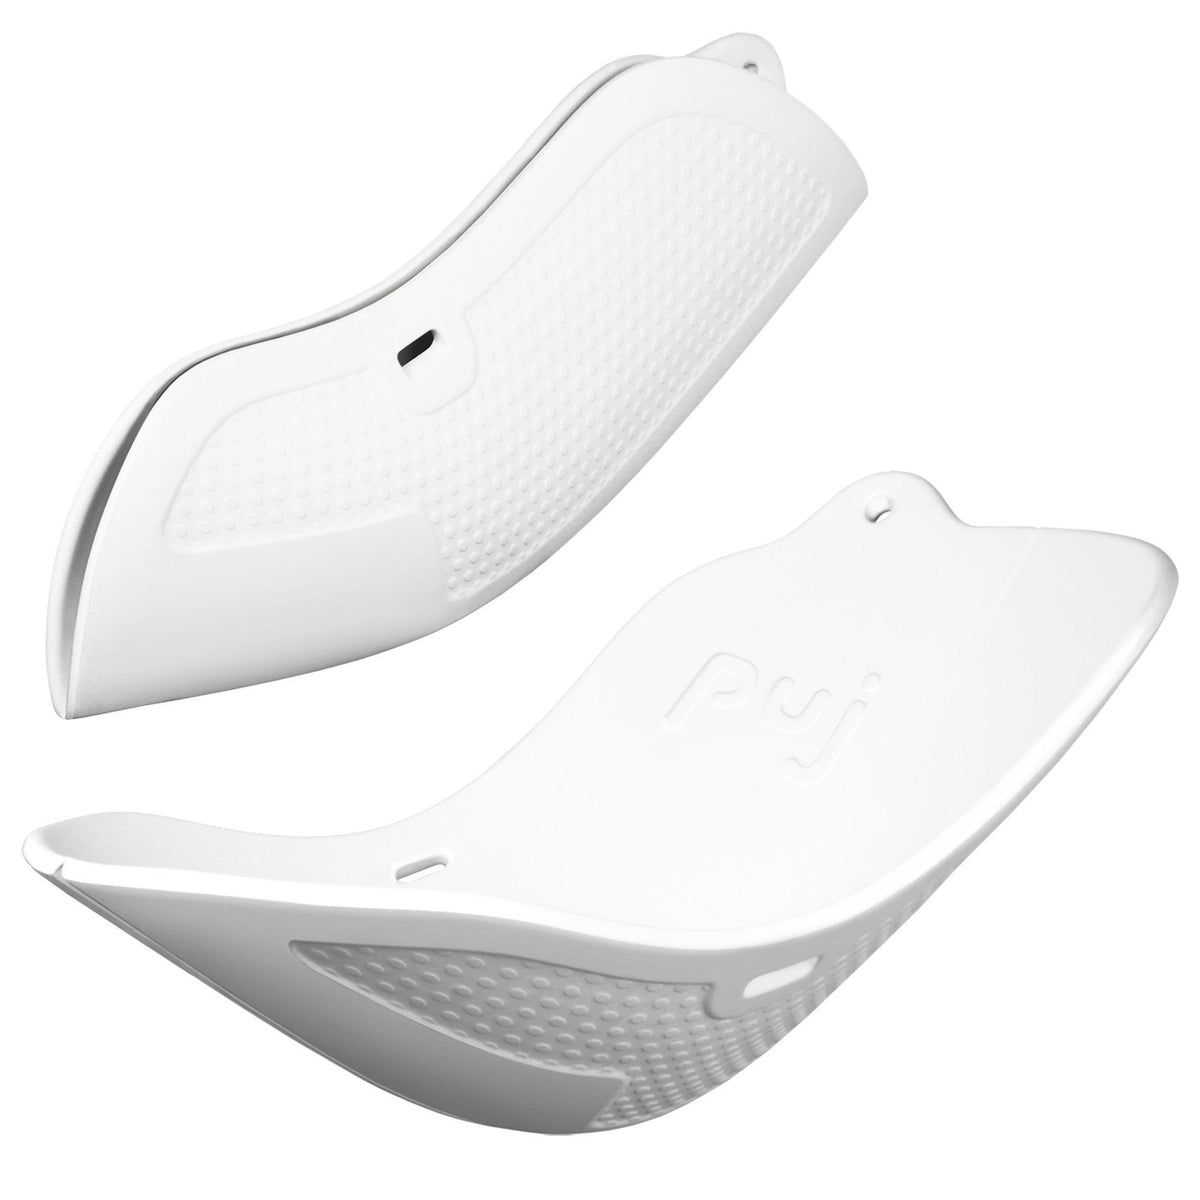 Puj Puj Flyte Compact Infant Bathtub, Baby Bathtub for Newborns and  Infants, Stylish Baby Bath Essentials for Home and Travel, 23.5 x 10.51 x  1.5 inches, White